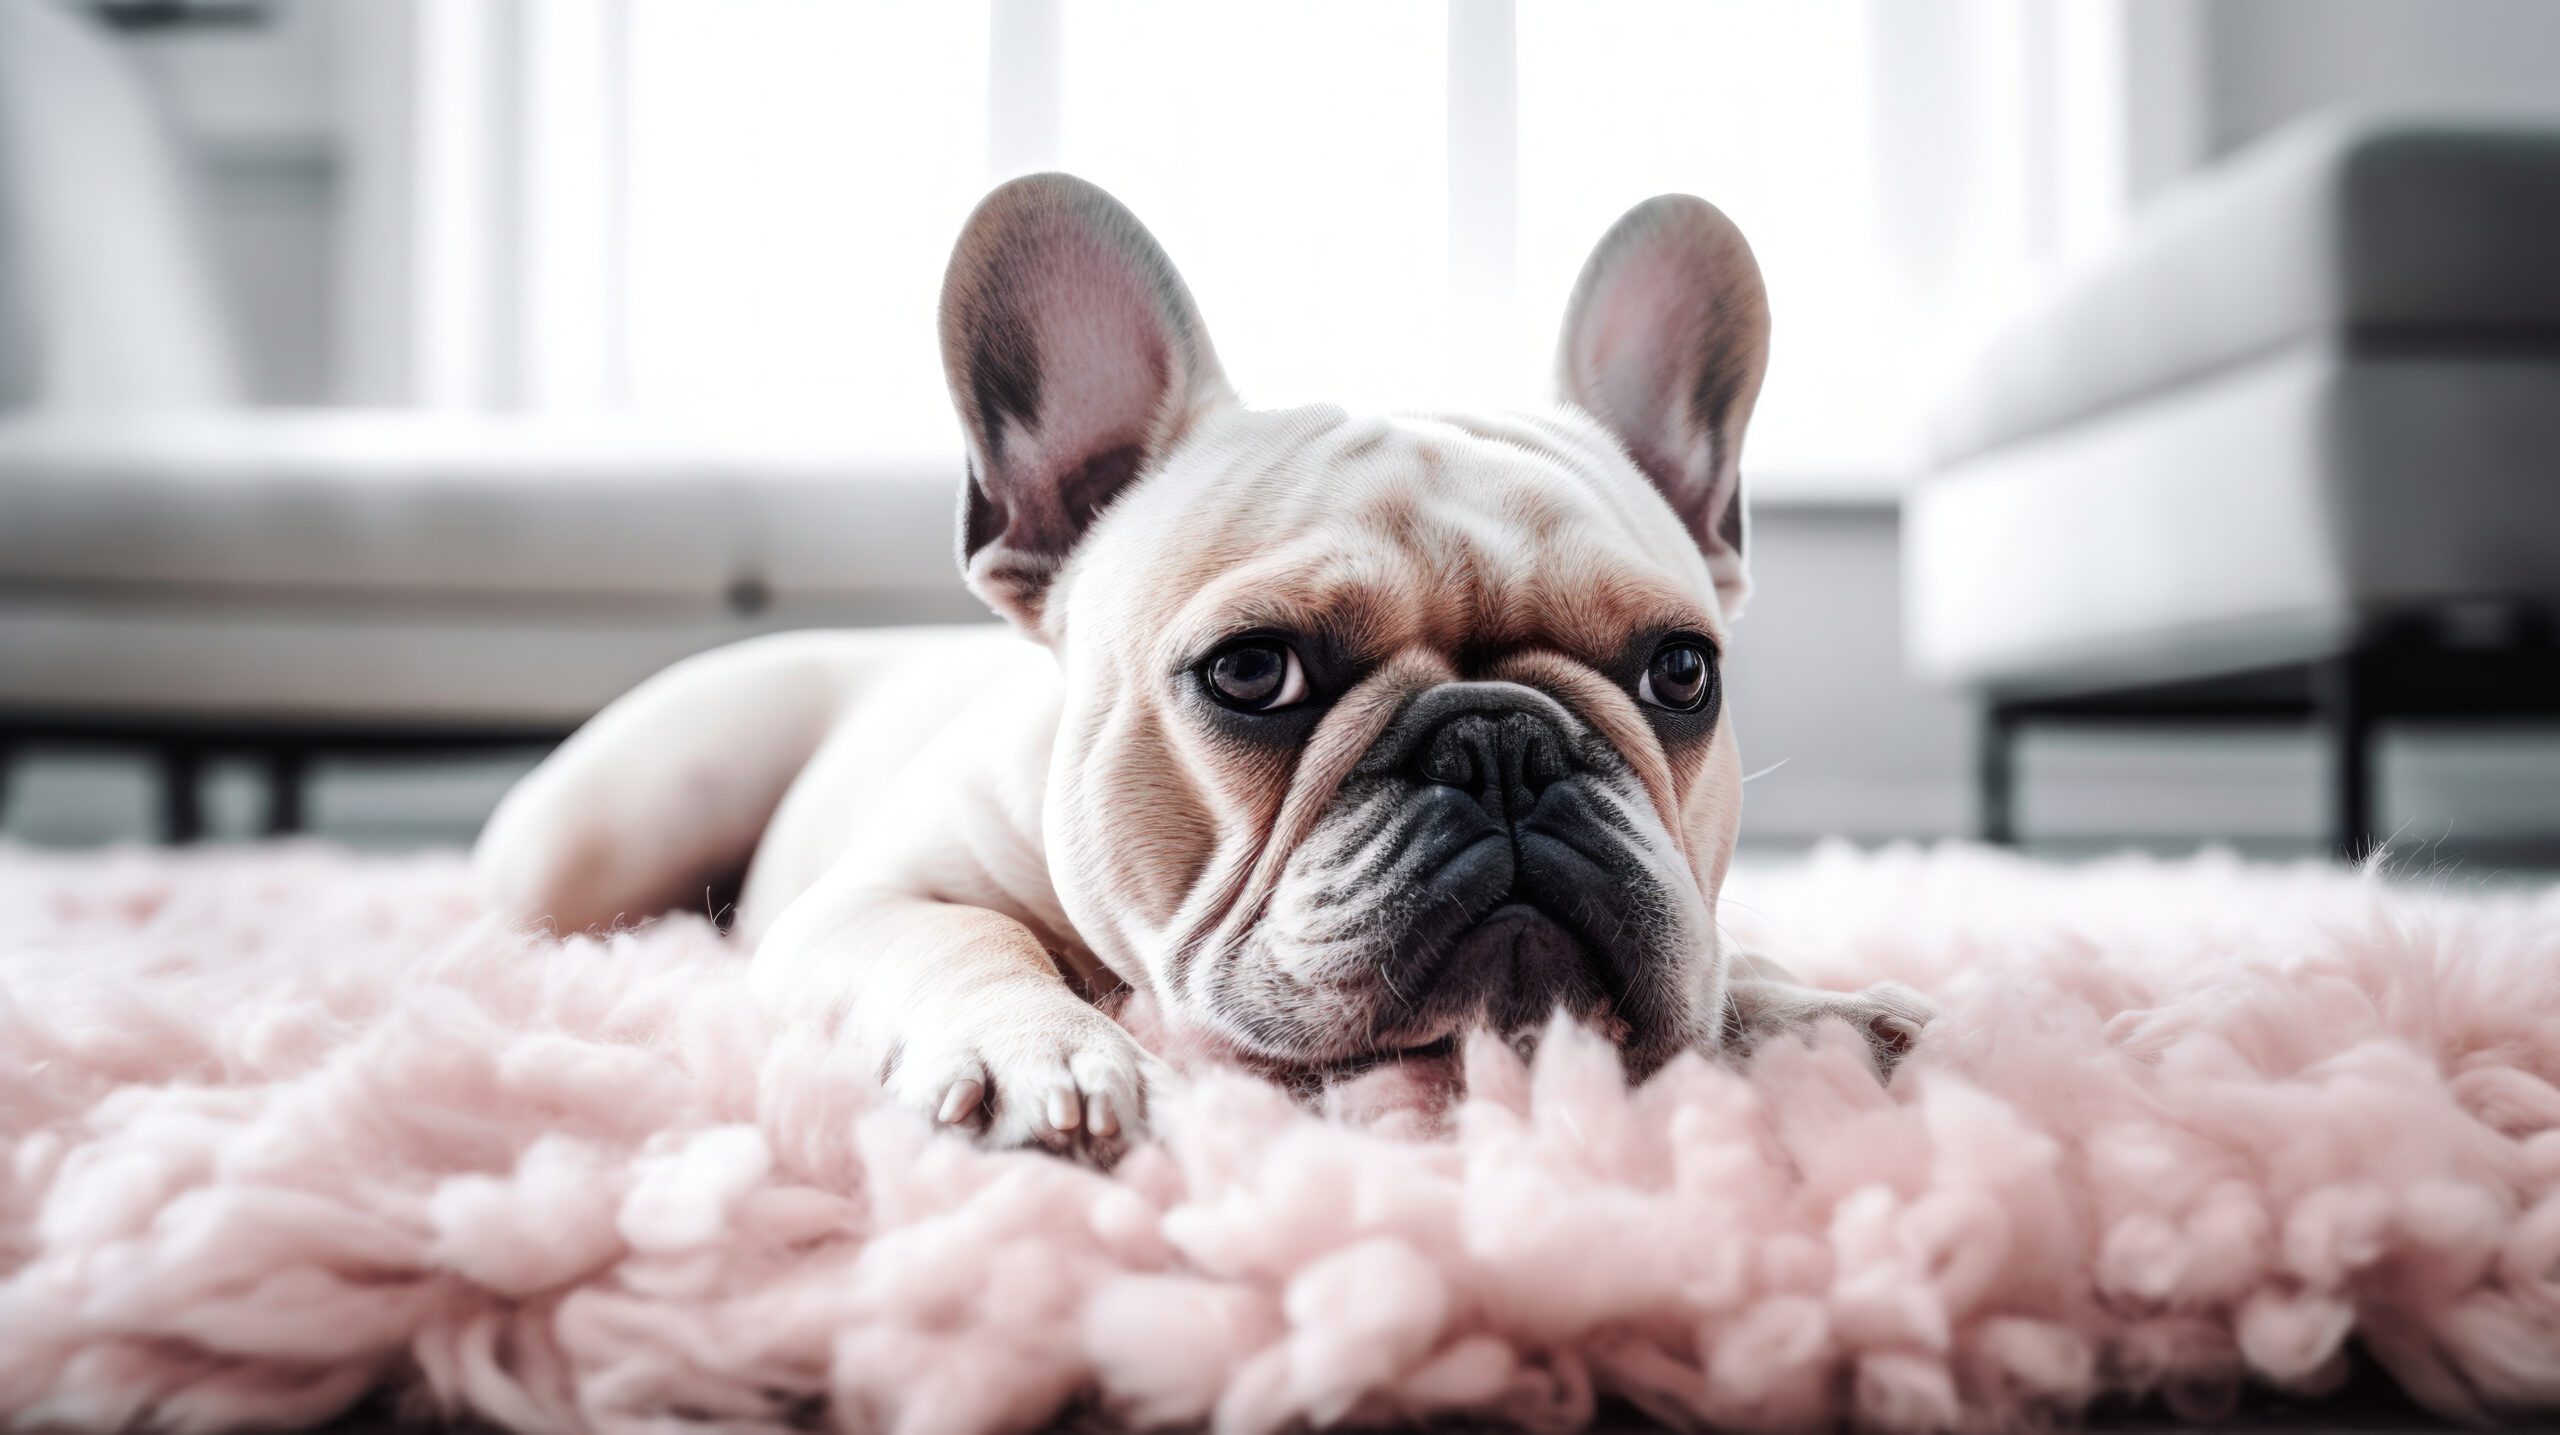 4k hd size wallpaper image of small french bulldog laying down on a pink carpet